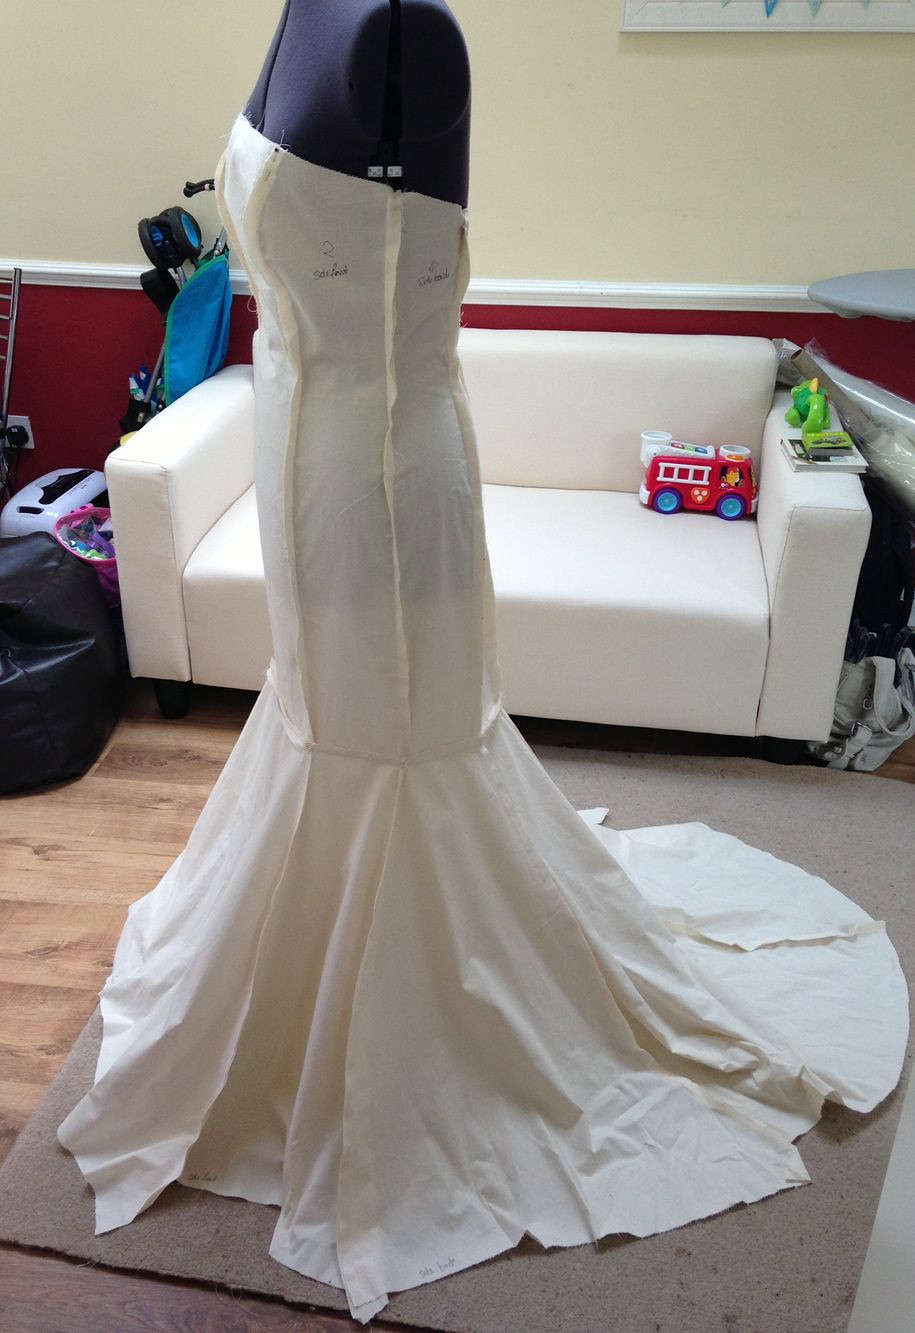 How To Make Your Own Wedding Dress
 Fishtail wedding dress pattern stage 1 Make Your Own